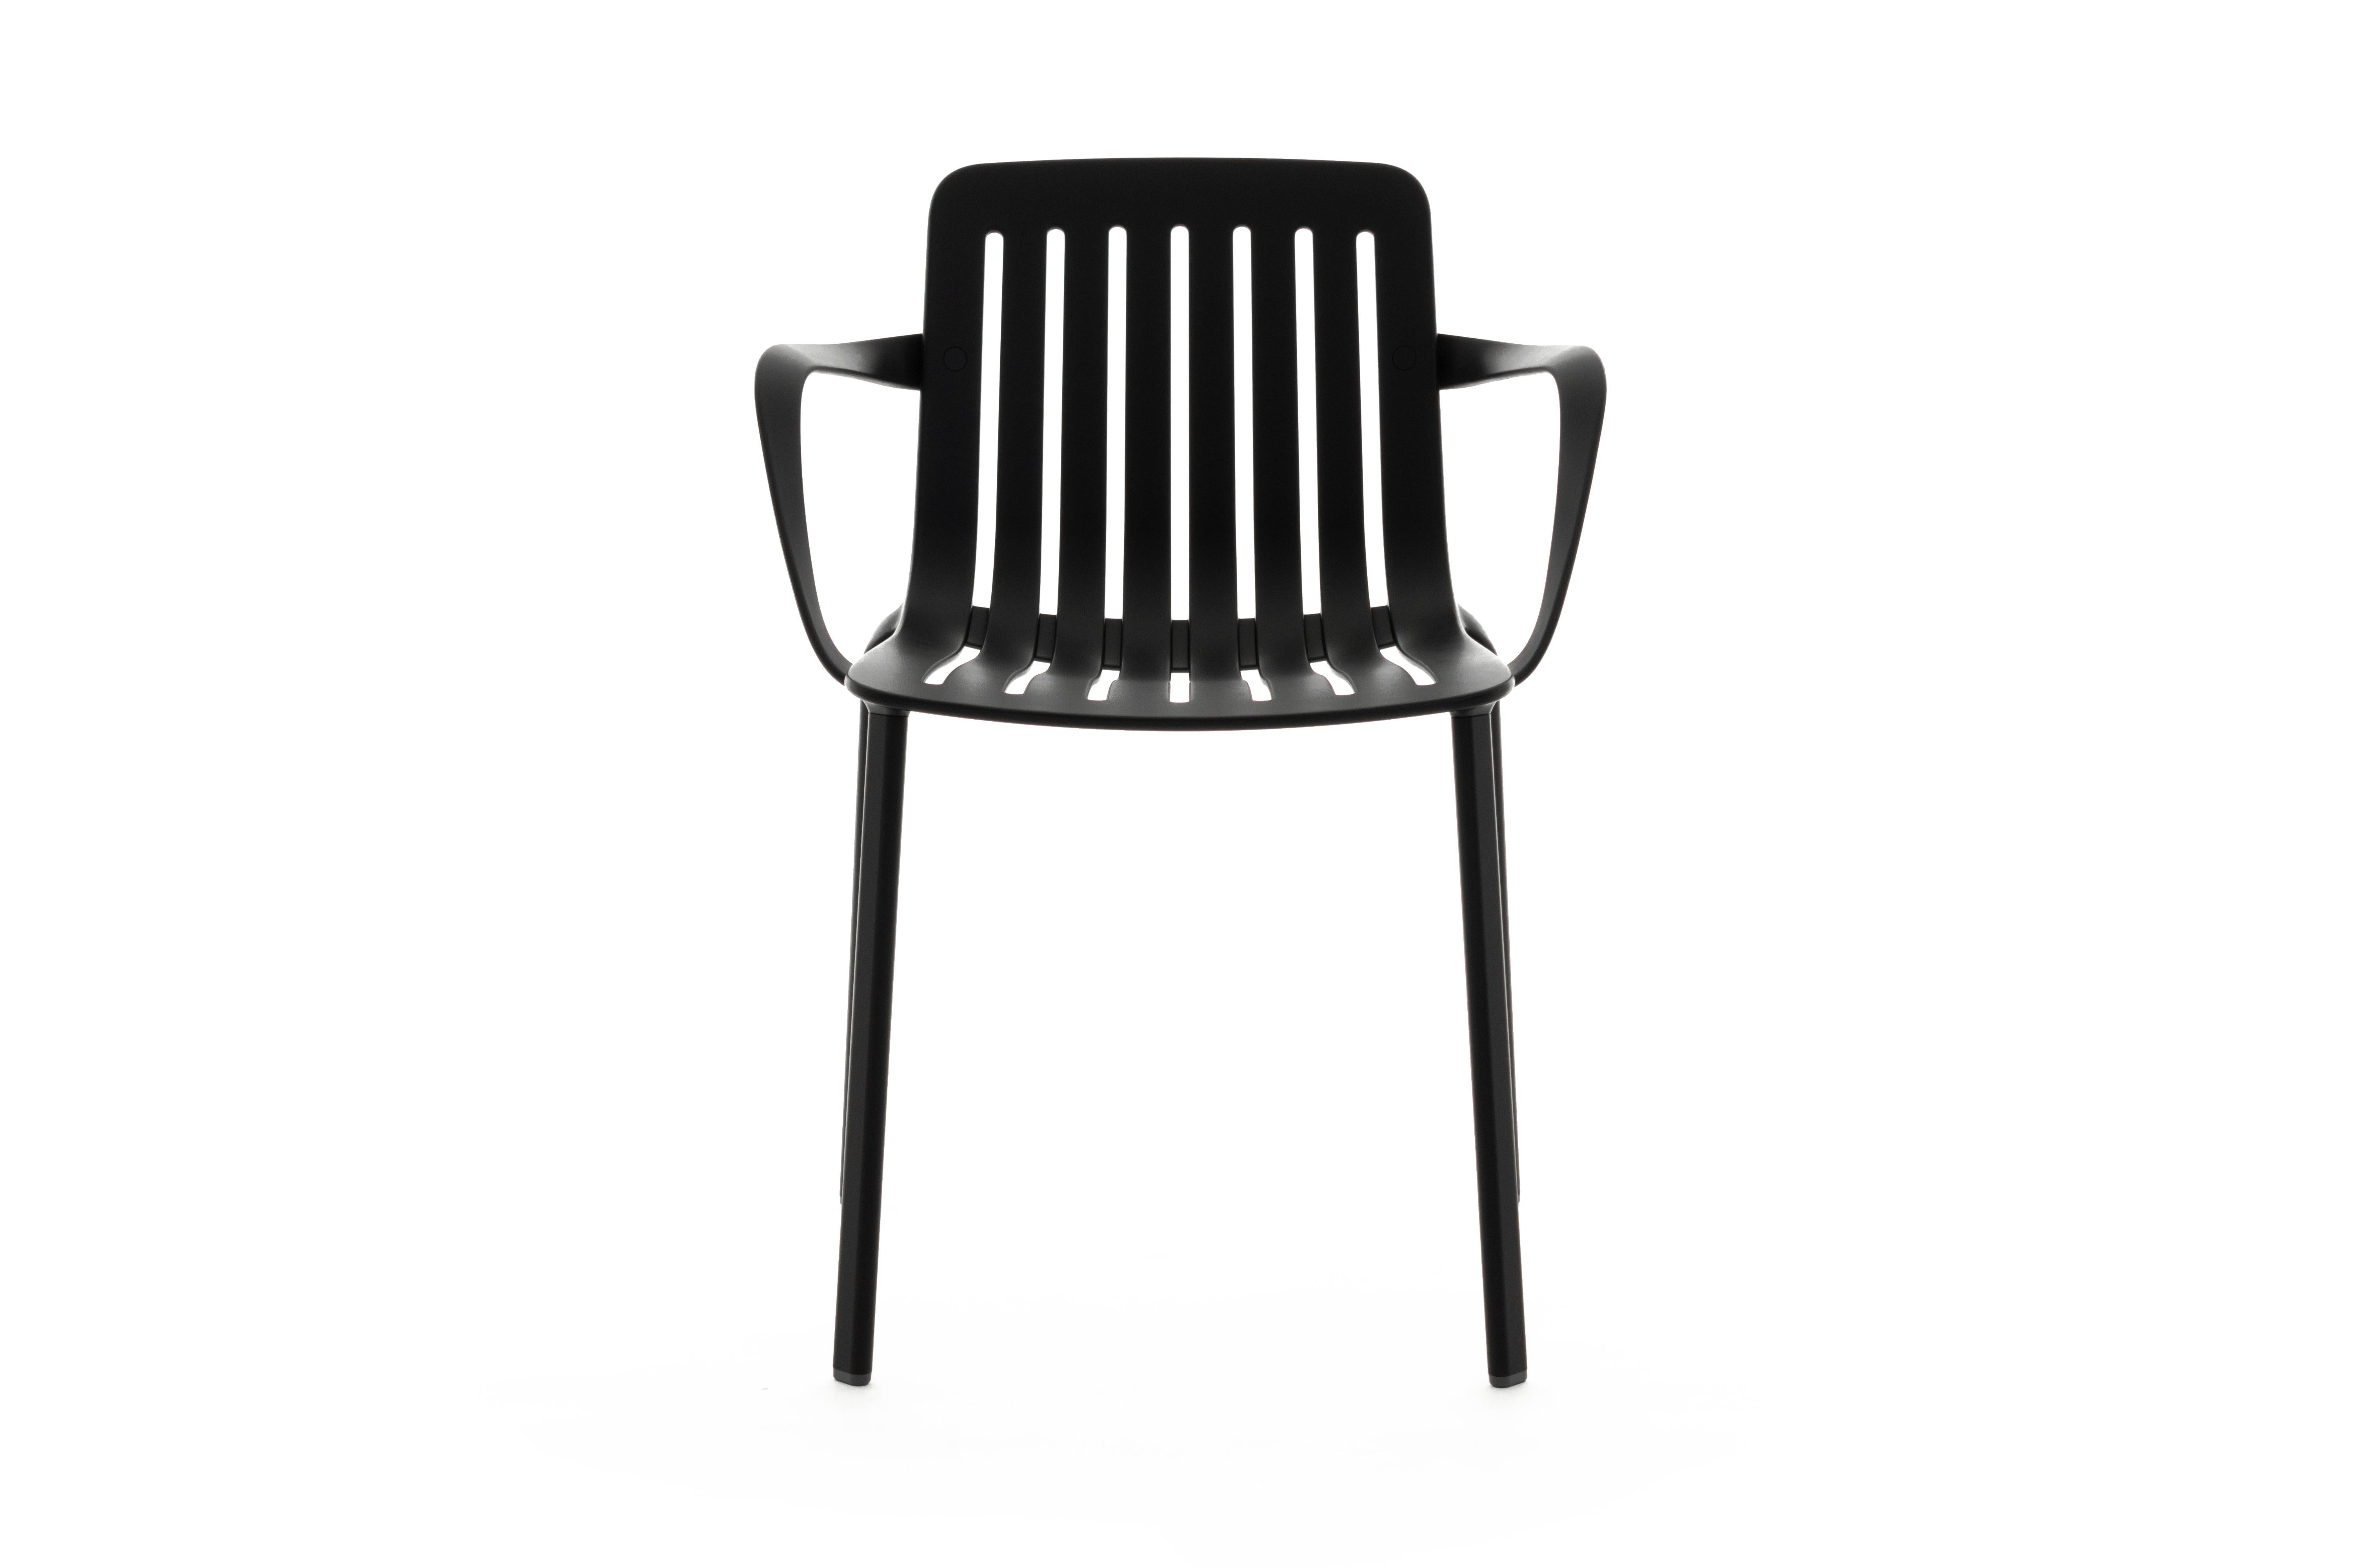 The Plato chair designed by Jasper Morrison is versatile in use and well suited for domestic, professional, and public spaces - indoors and outdoors. Under- stated and with a neoclassical inspiration, hence the name that references one of the